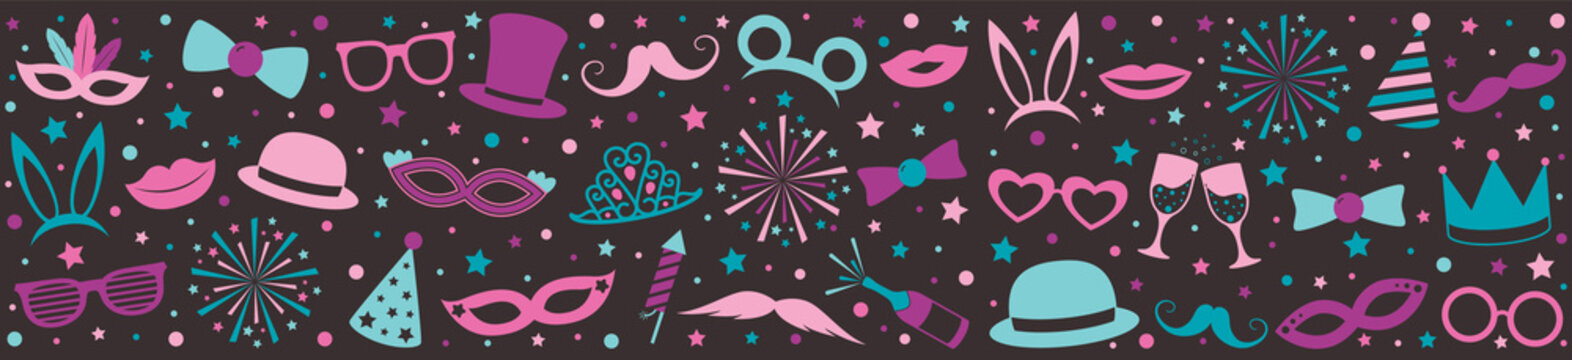 Party elements - panoramic header with icons. Vector